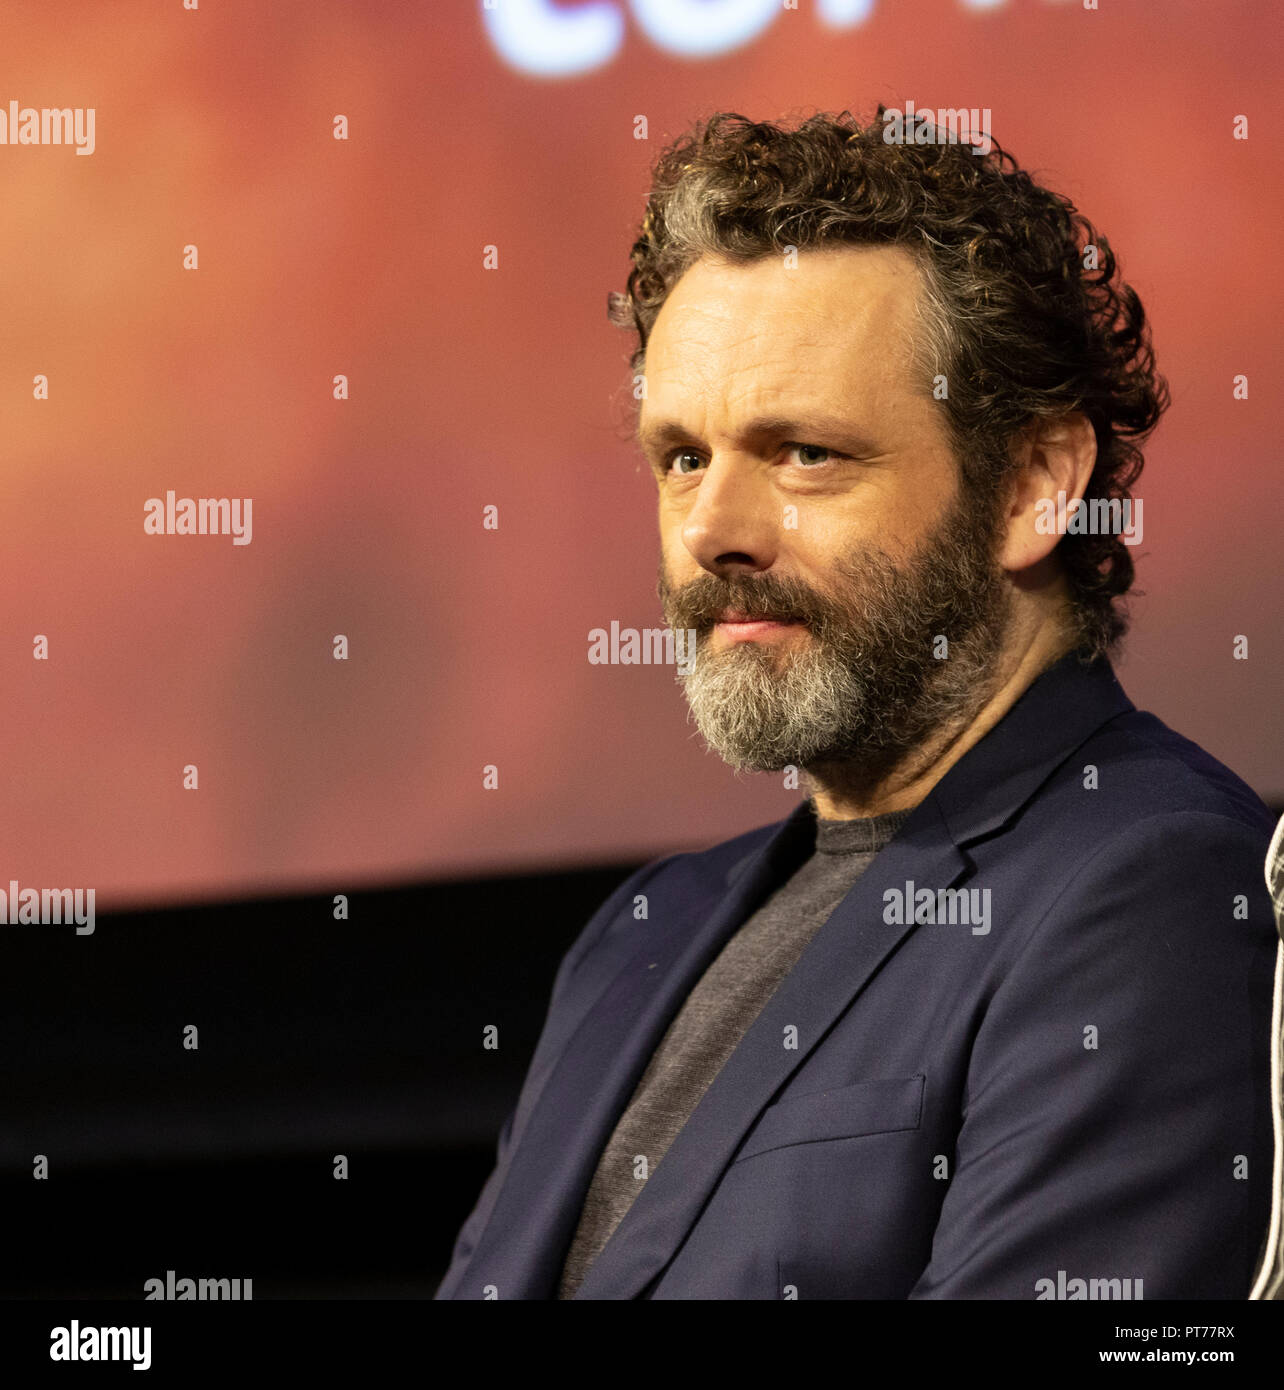 New York, NY - October 6, 2018: Michael Sheen attends Amazon Prime Good  Omens panel during New York Comic Con at Hulu Theater at Madison Square  Garden Stock Photo - Alamy